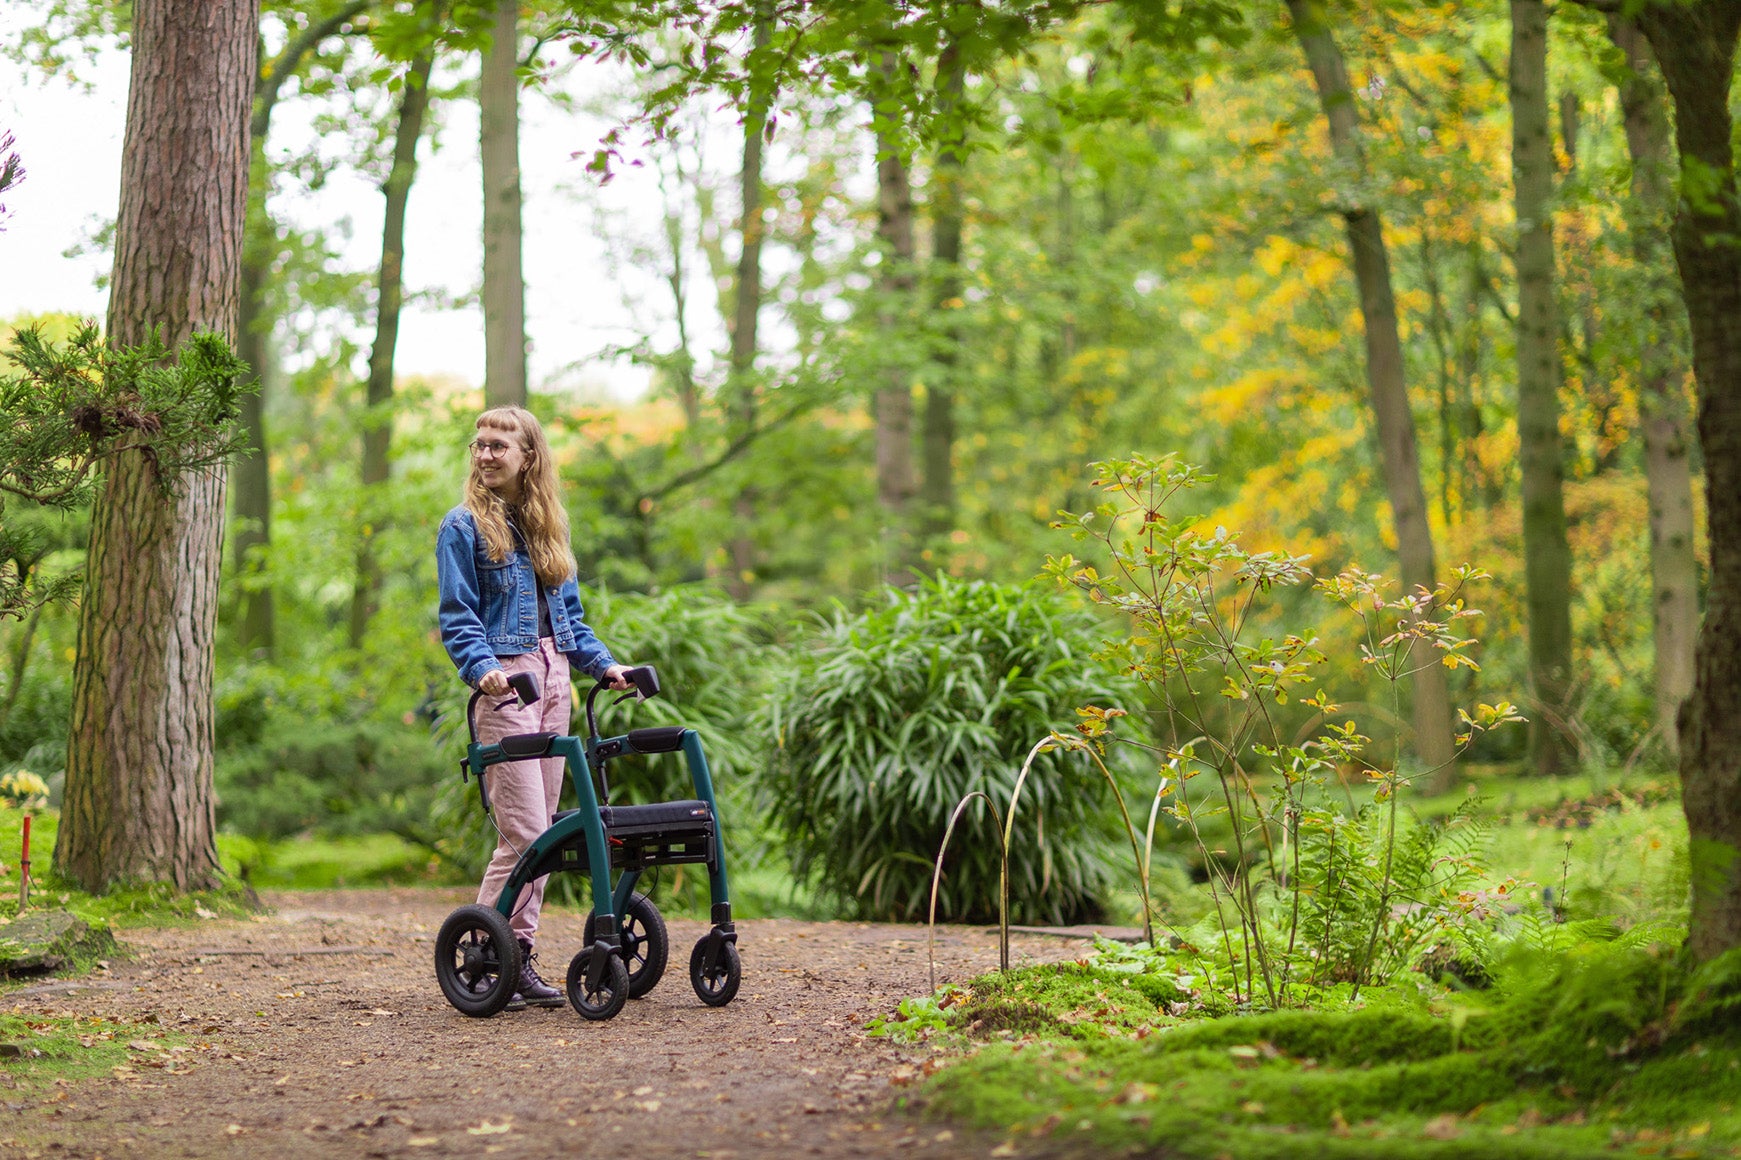 A girl smiles as she uses a 'Rollz Performance' walking frame in a park with trees in the background